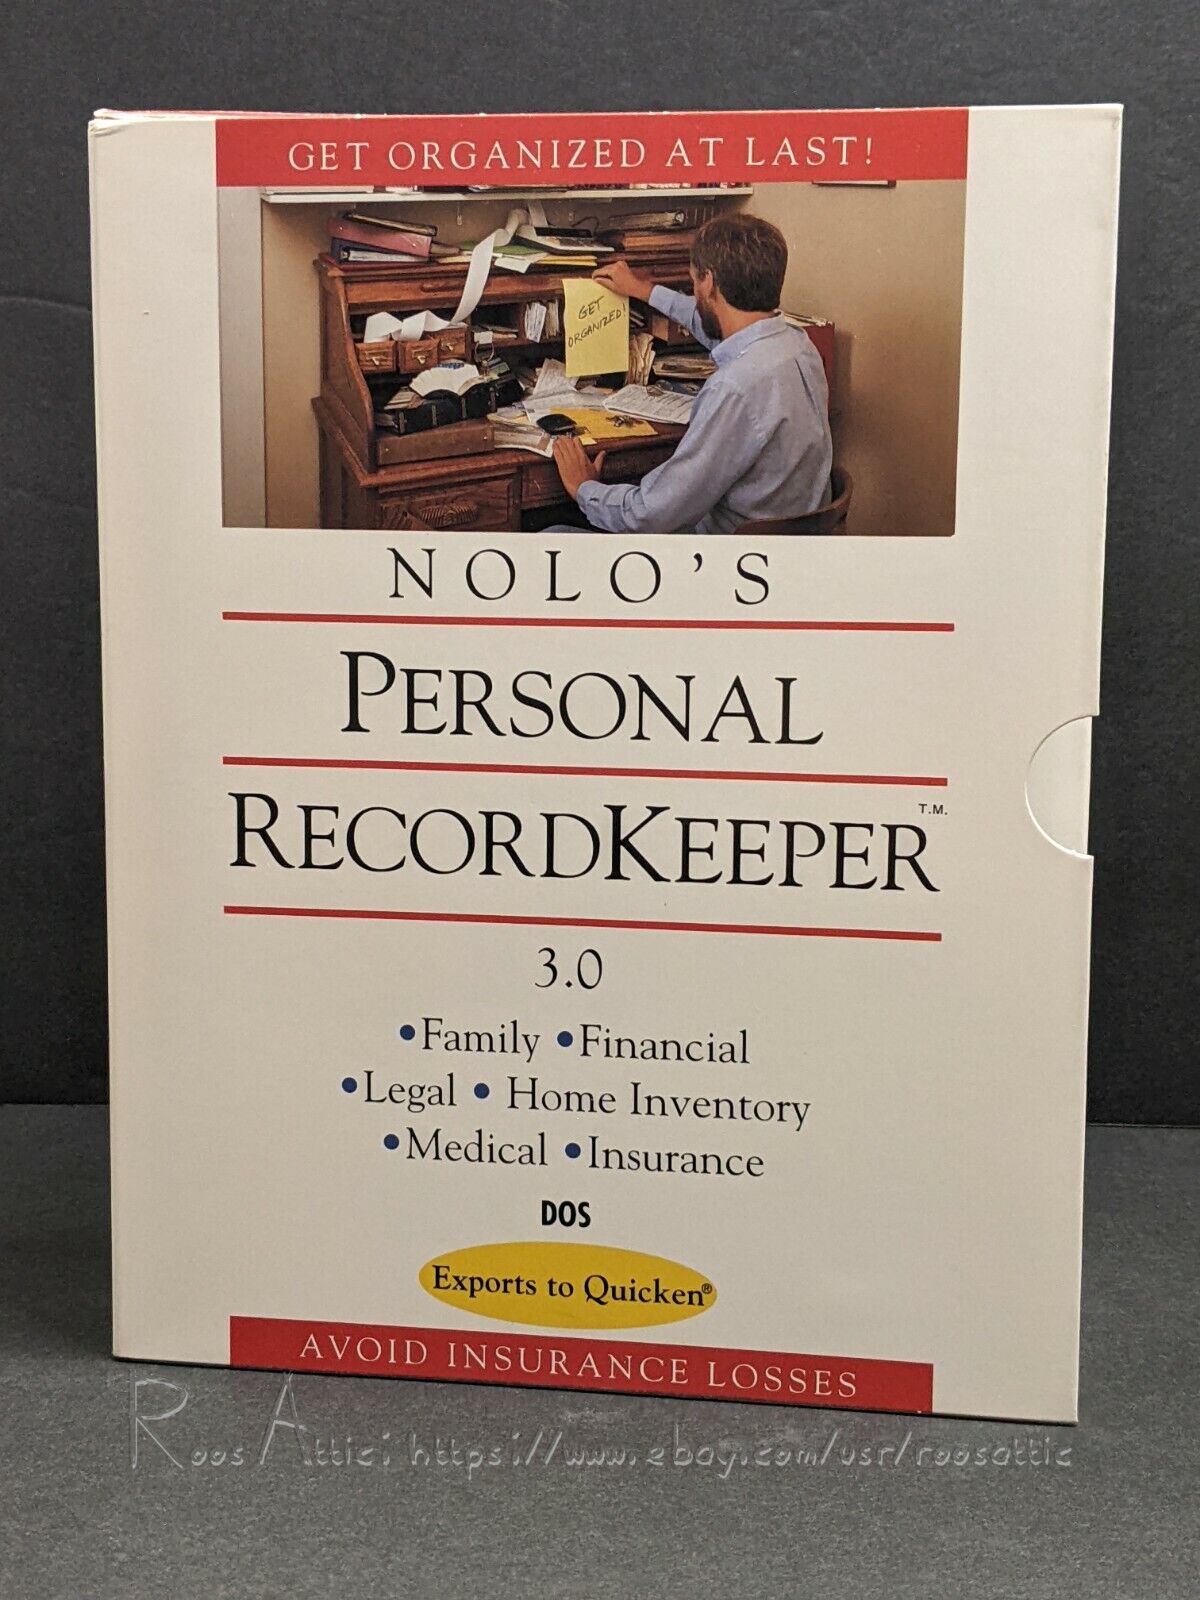 Nolo’s Personal RecordKeeper Software Version 3.0 for DOS 1992: IBM PC / NEW